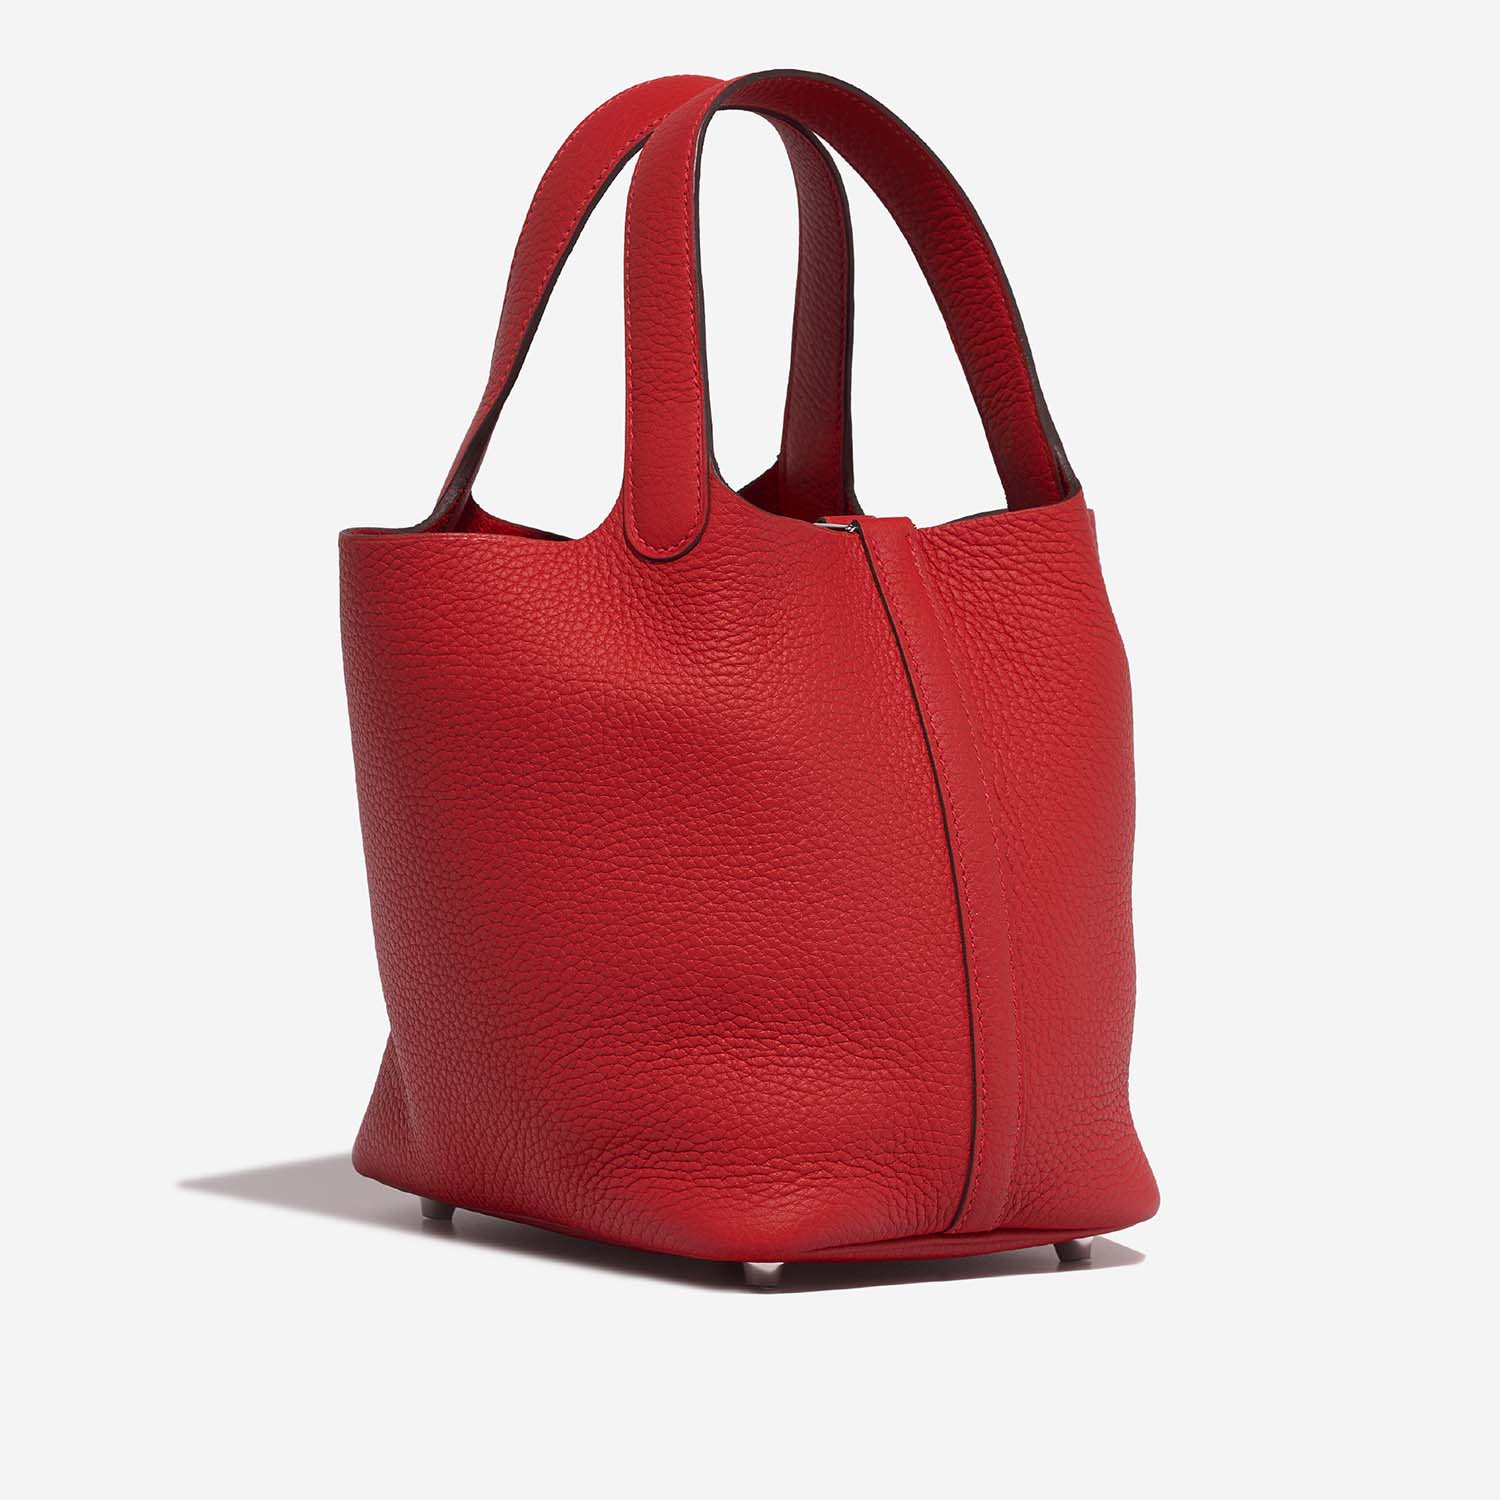 Hermès Red Taurillion Clemence Picotin